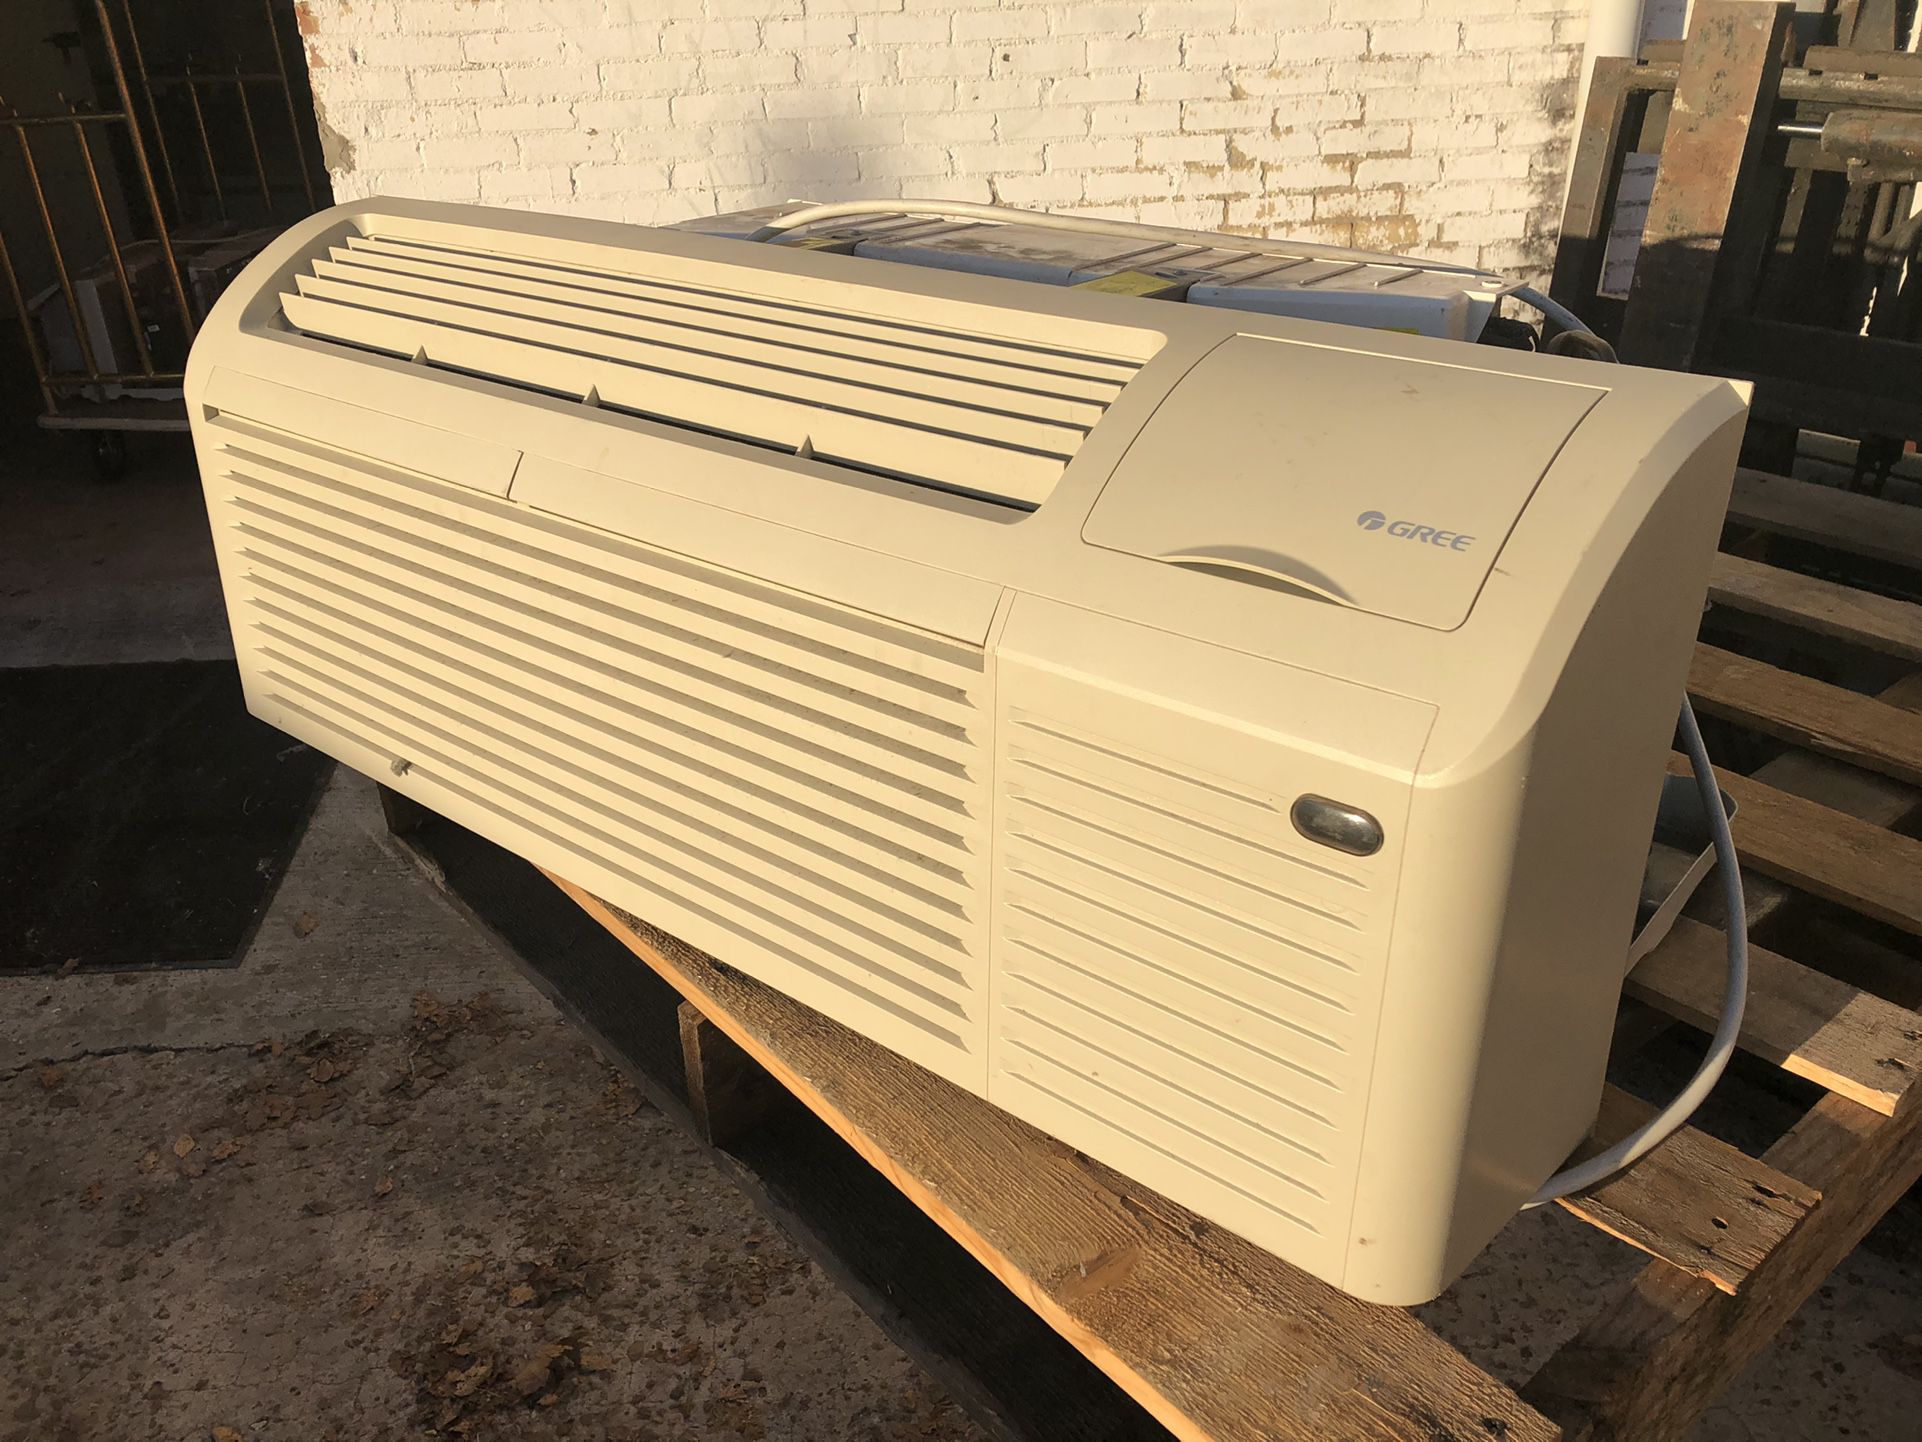 Air Conditioner Unit PTAC GREE Brand 9,400 BTU Multiple Available- $500 Each